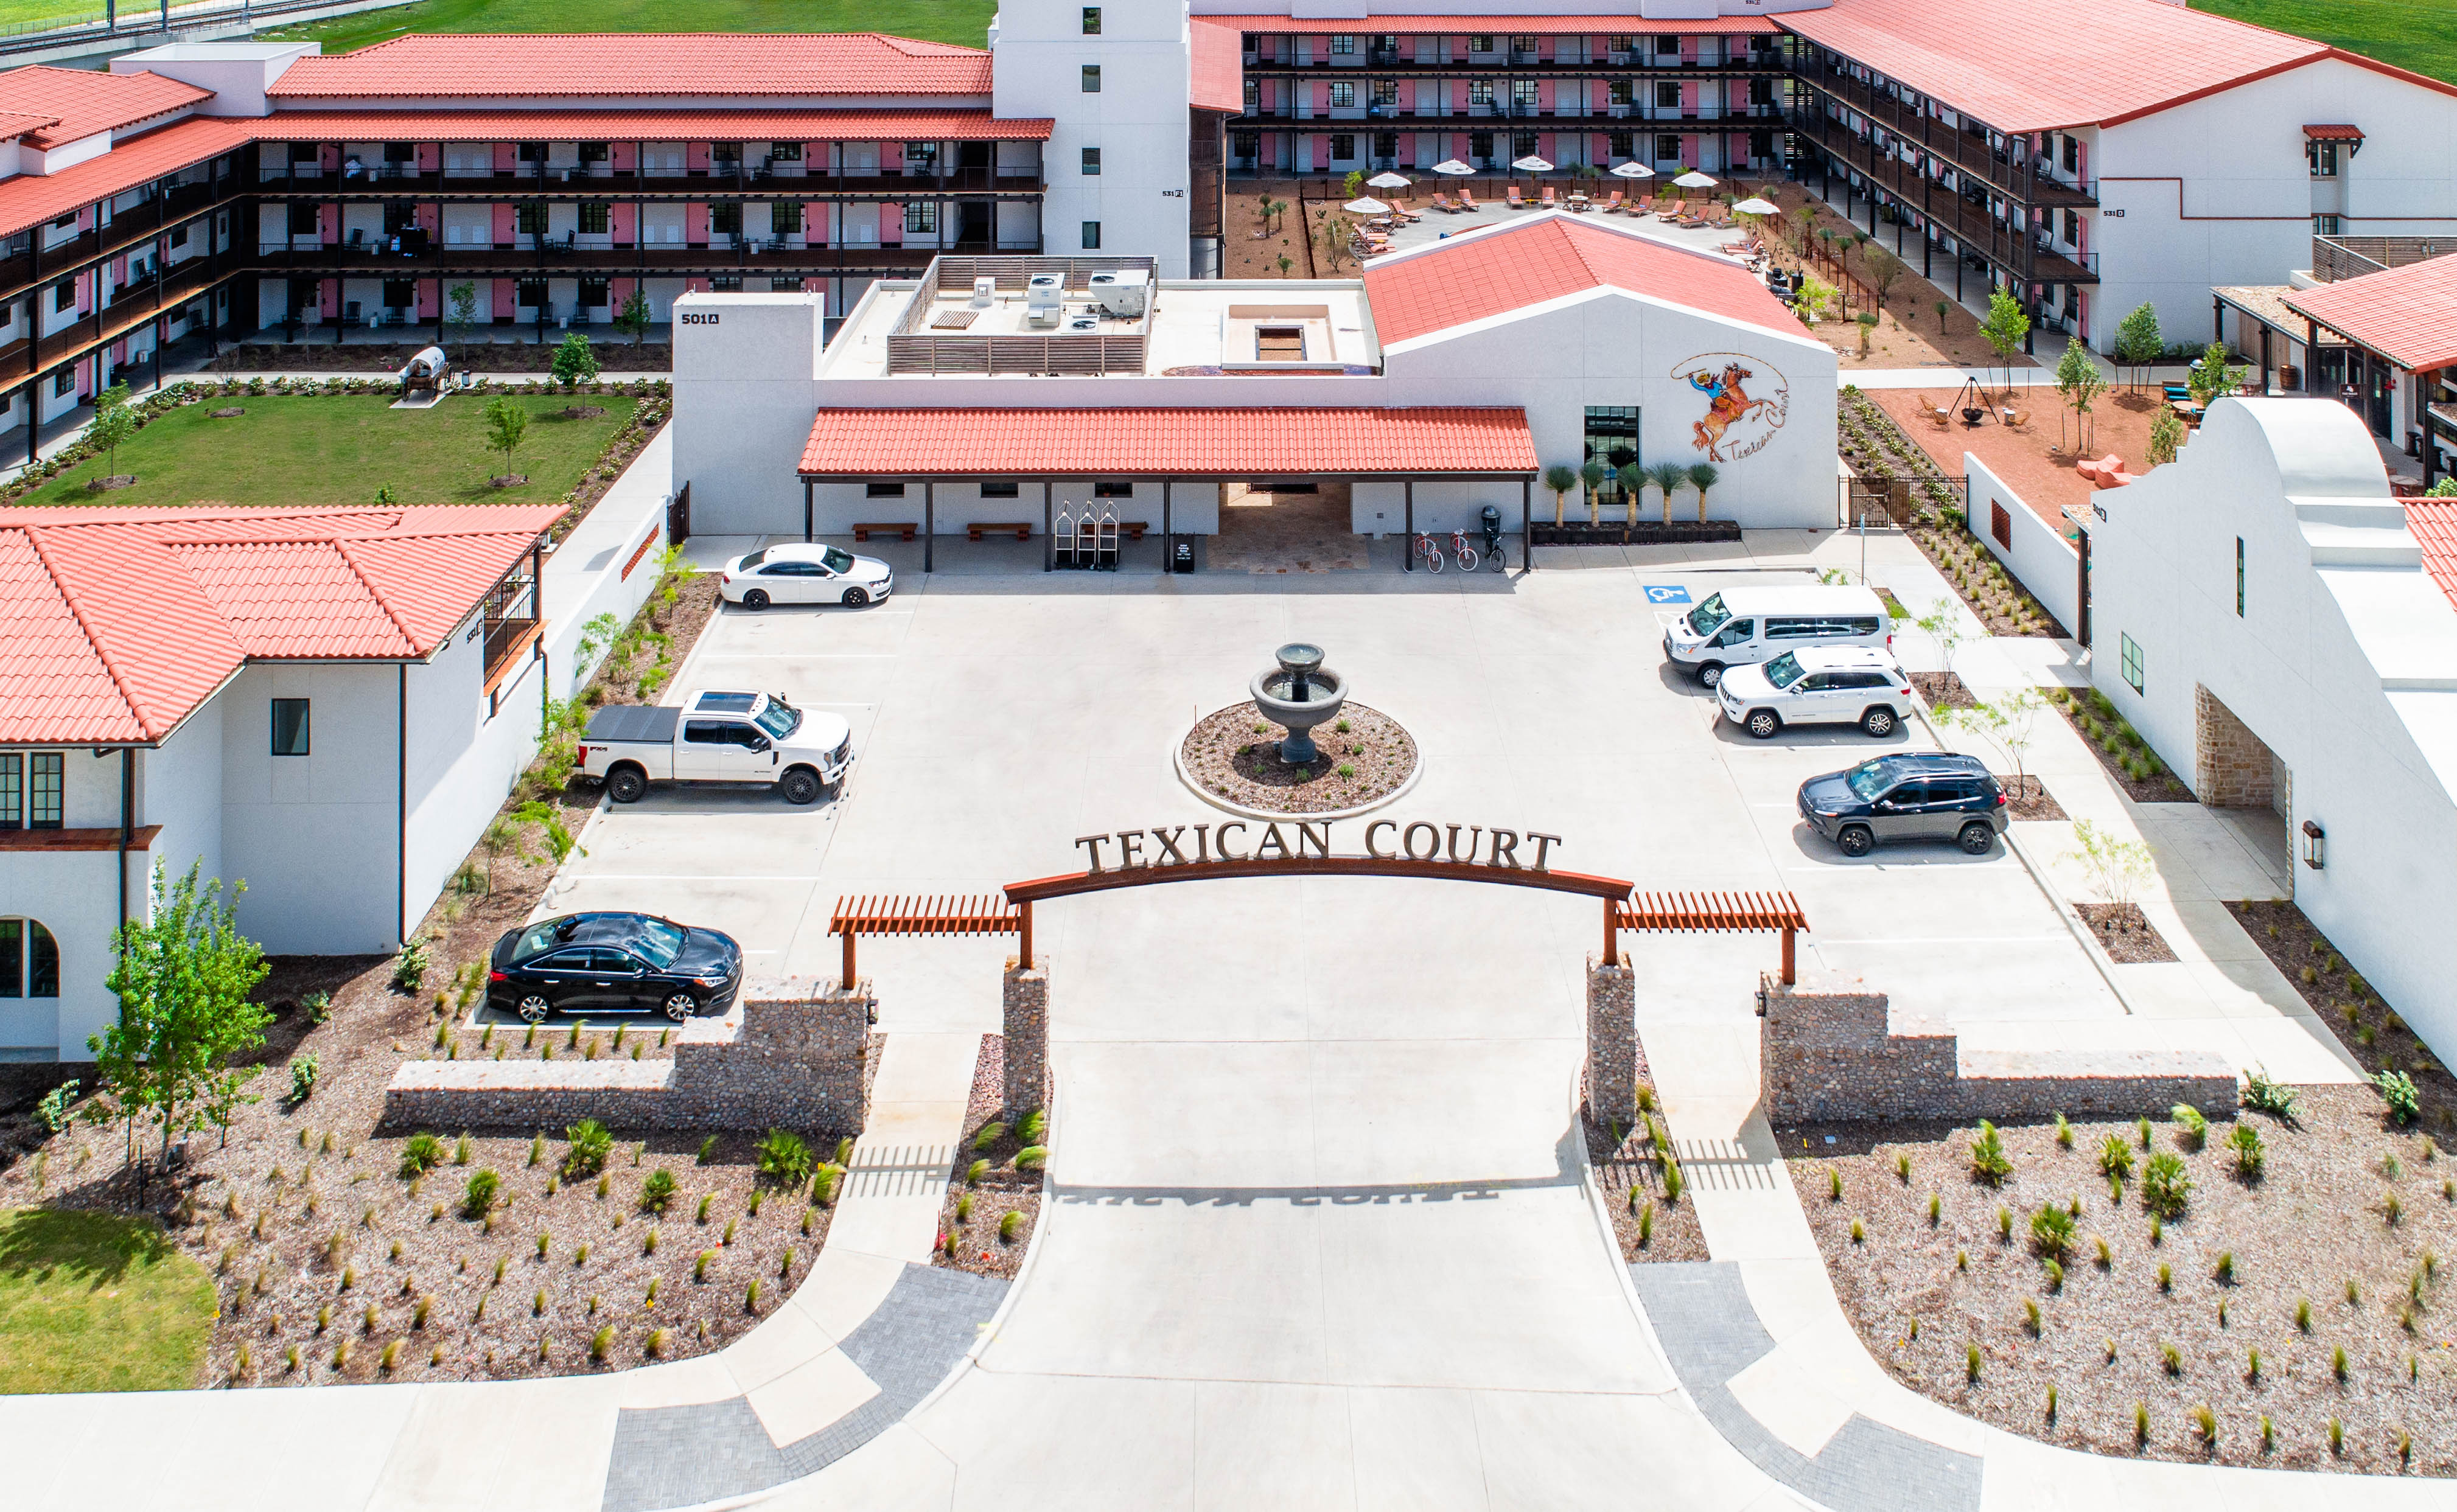 Texican Court hotel